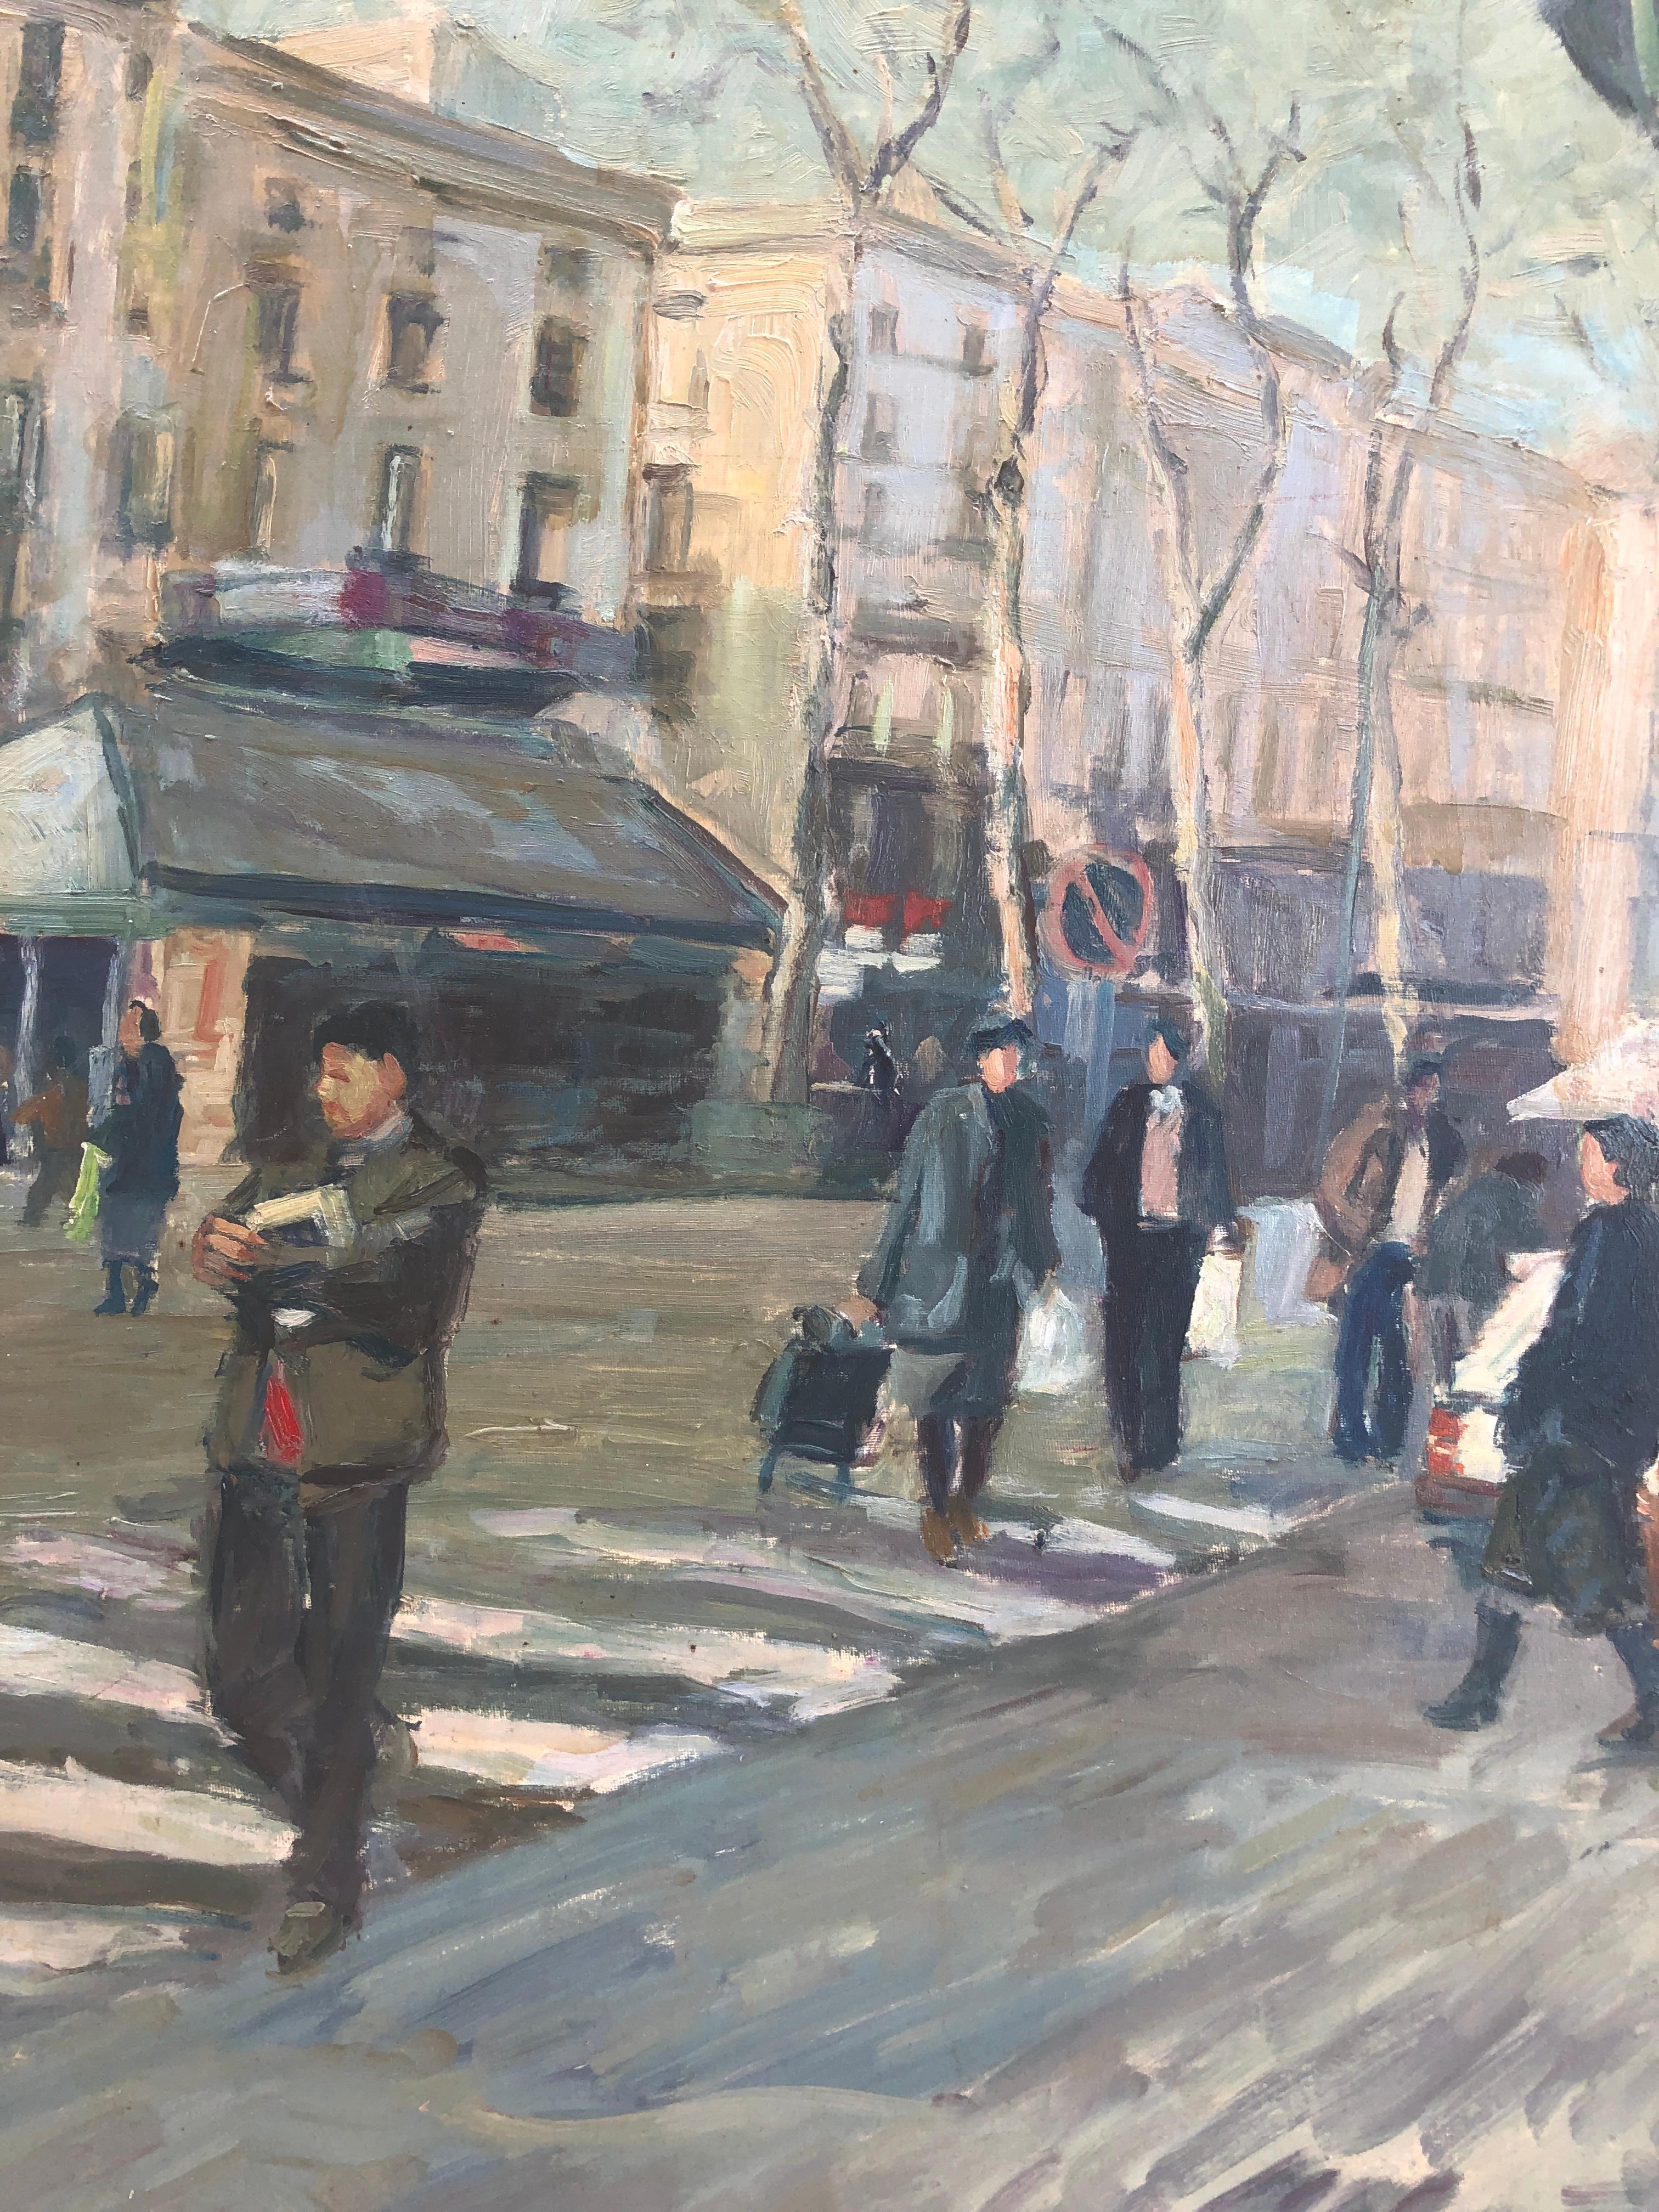 The Ramblas of Barcelona Spain oil on canvas painting urbanscape - Gray Landscape Painting by Pascual Fresquet